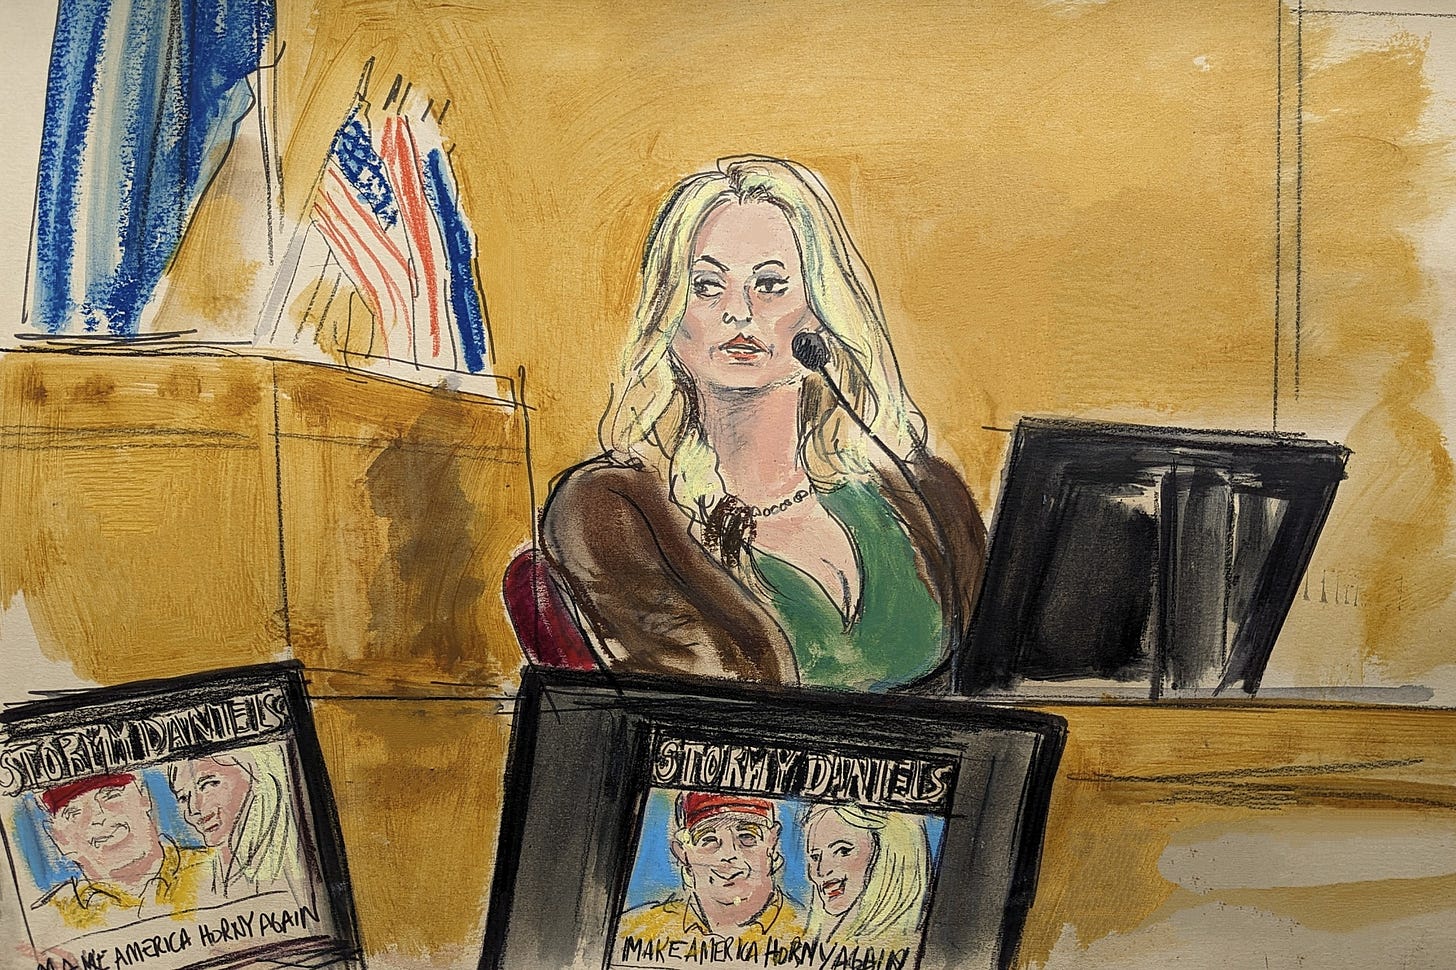 Stormy Daniels Dished Dirt on Trump, But Did She Help His Case? - Bloomberg